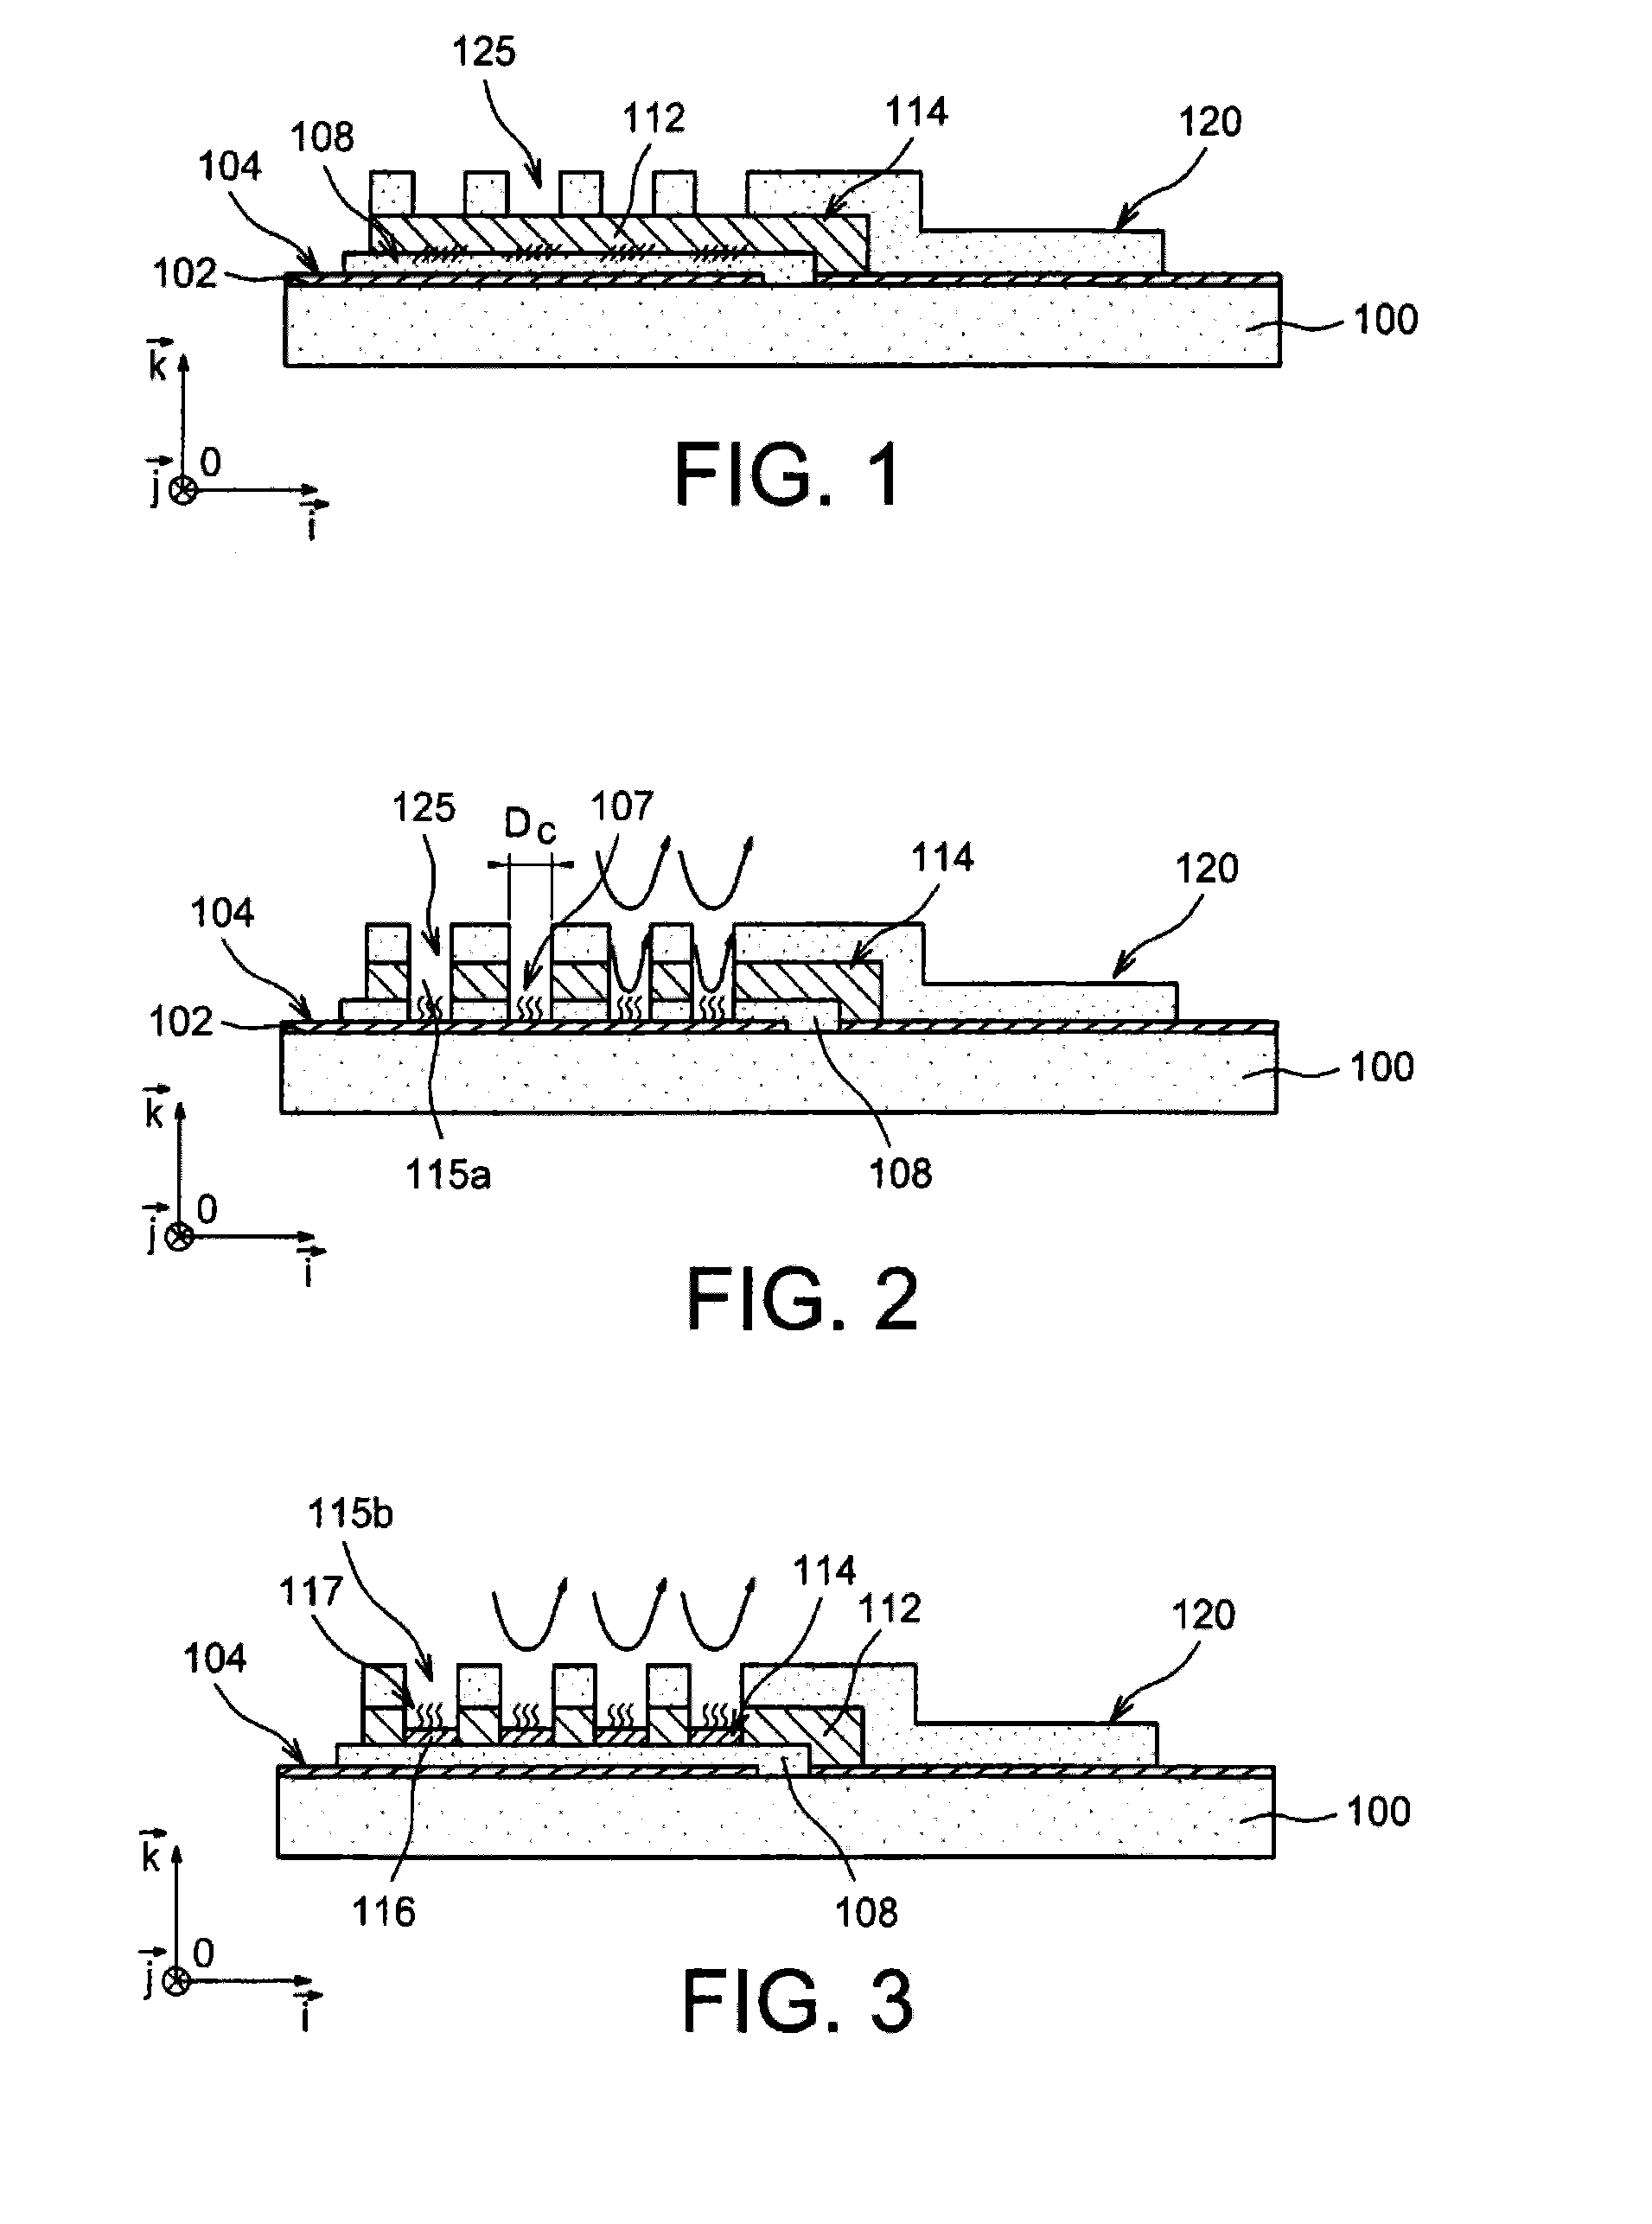 Capacitive humidity sensor with graphene electrode